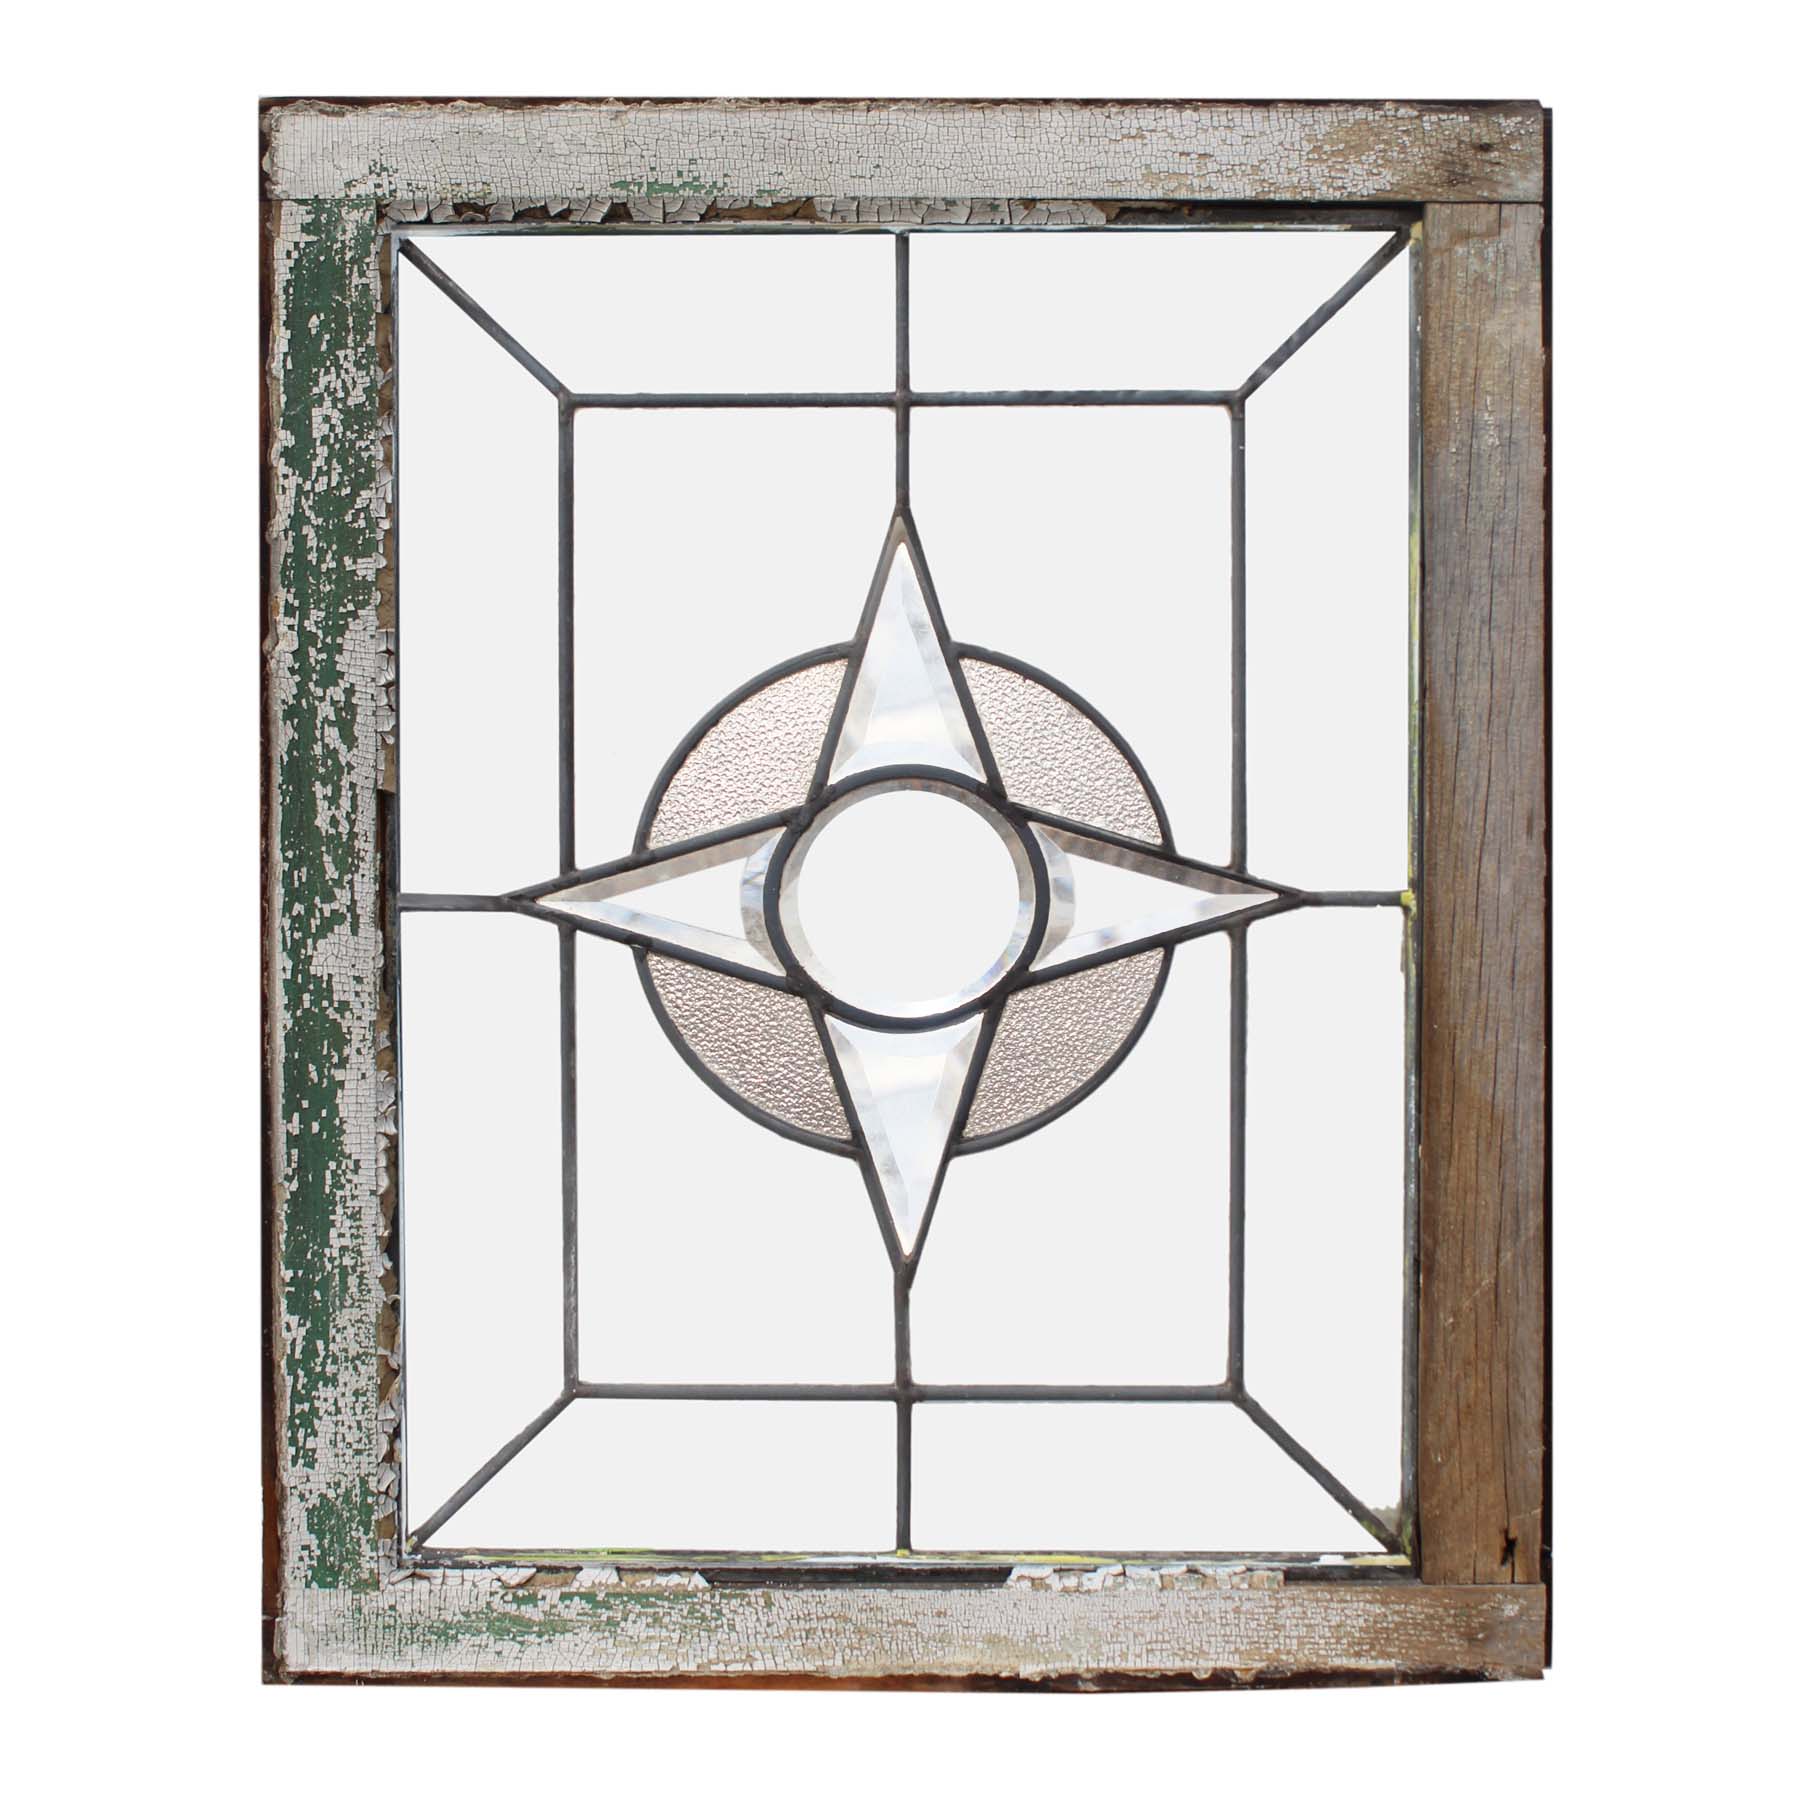 Reclaimed Antique American Leaded Glass Windows-70130